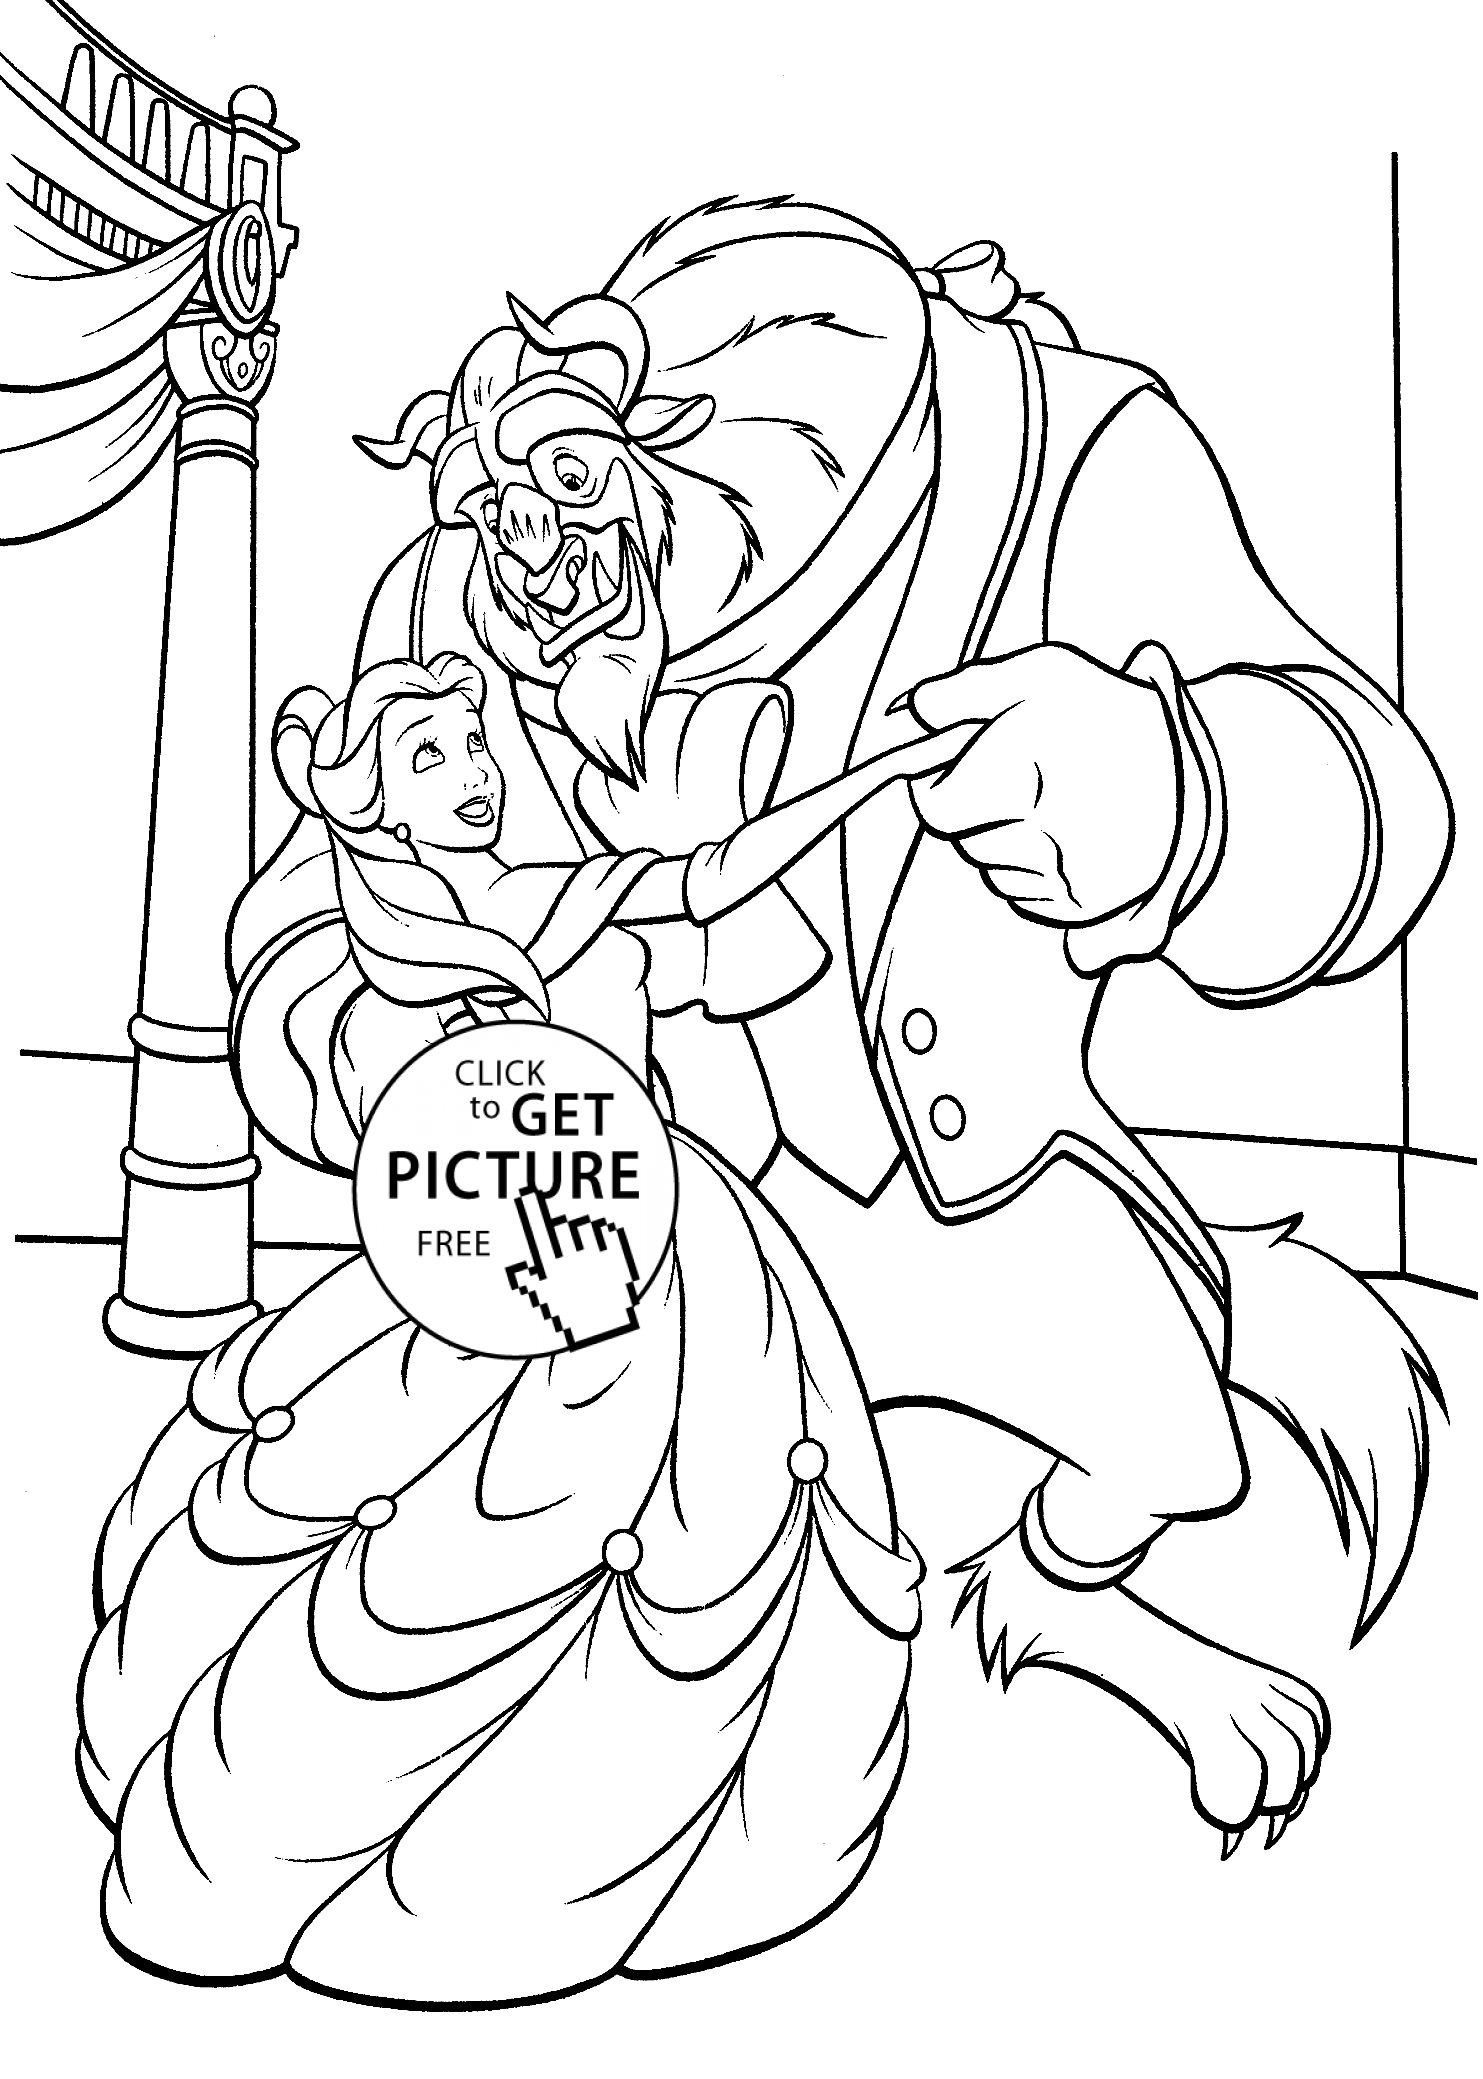 Beauty and the beast dancing coloring pages for kids, printable free